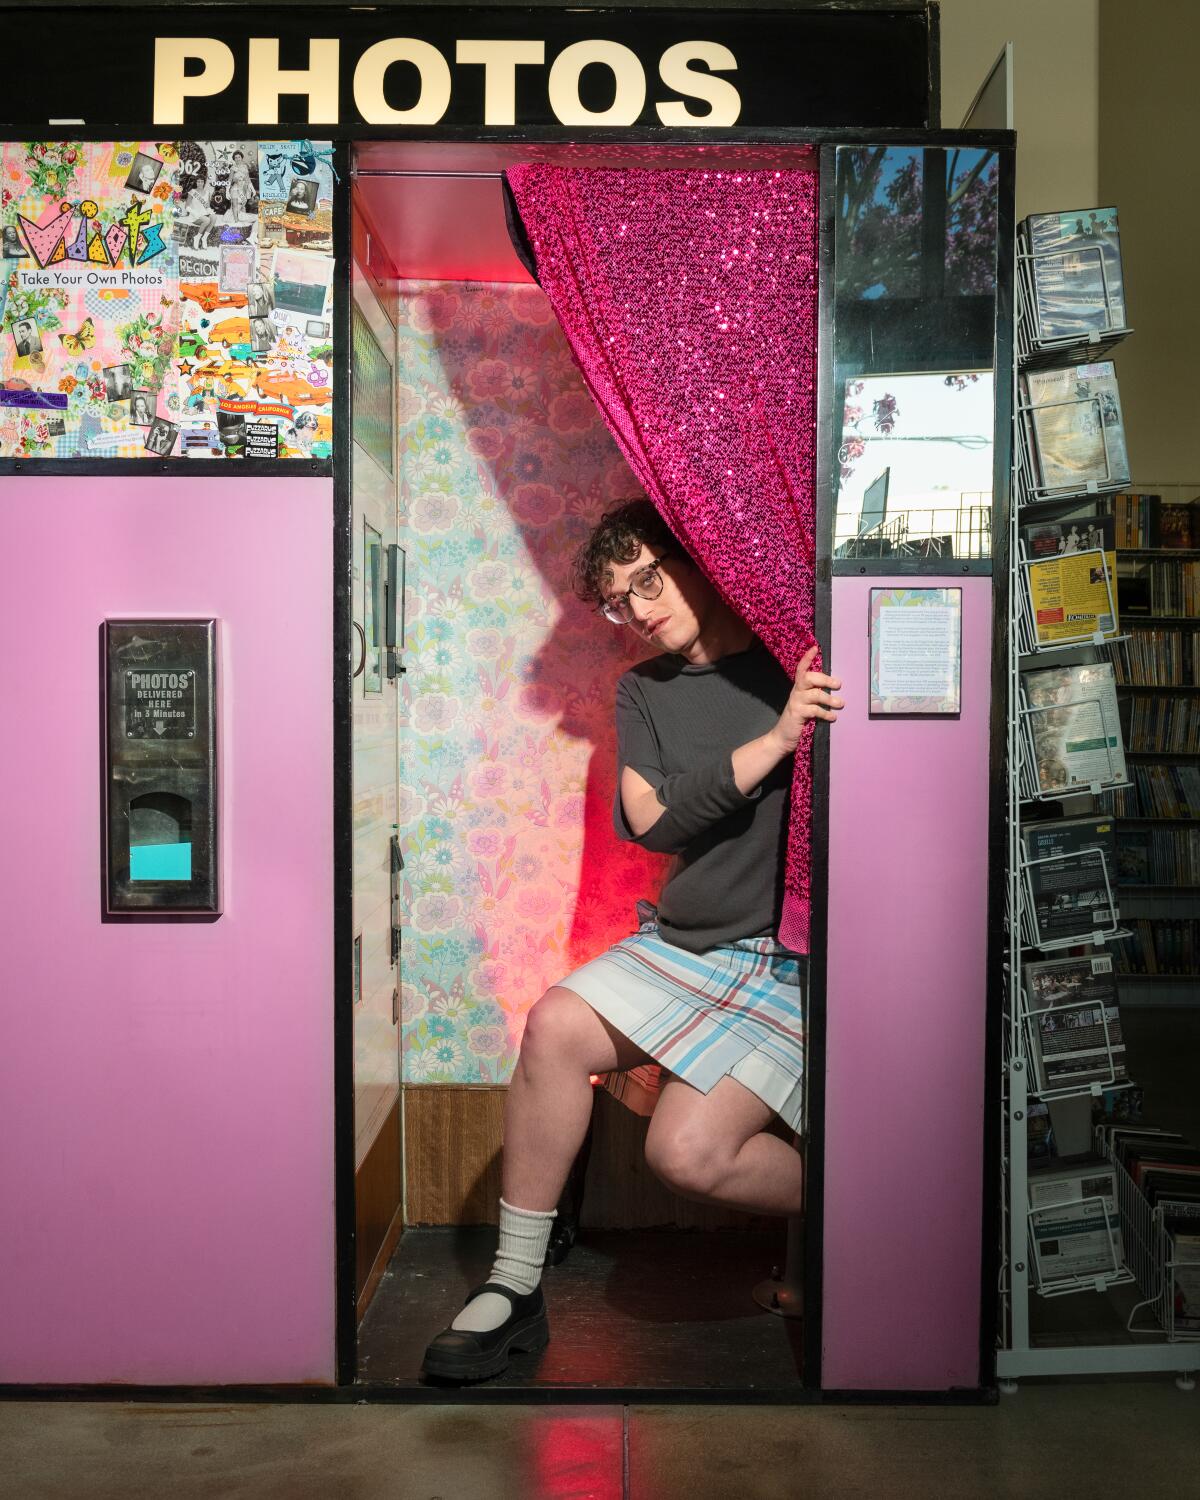 A filmmaker poses in a photo booth.